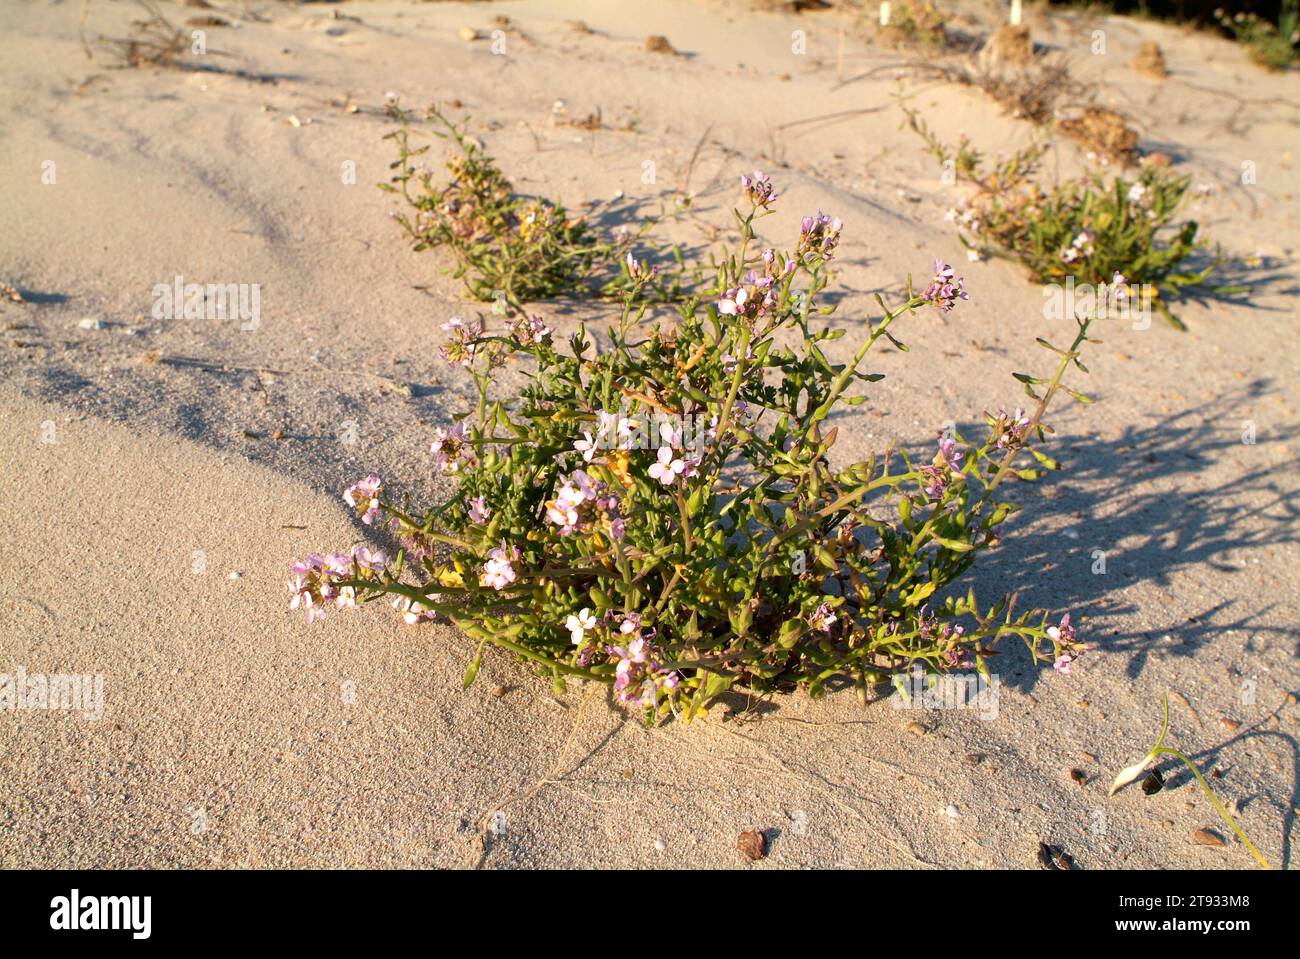 European searocket (Cakile maritima) is a succulent annual plant taht lives in coastlines of Europa, North Africa and West Asia. This photo was taken Stock Photo